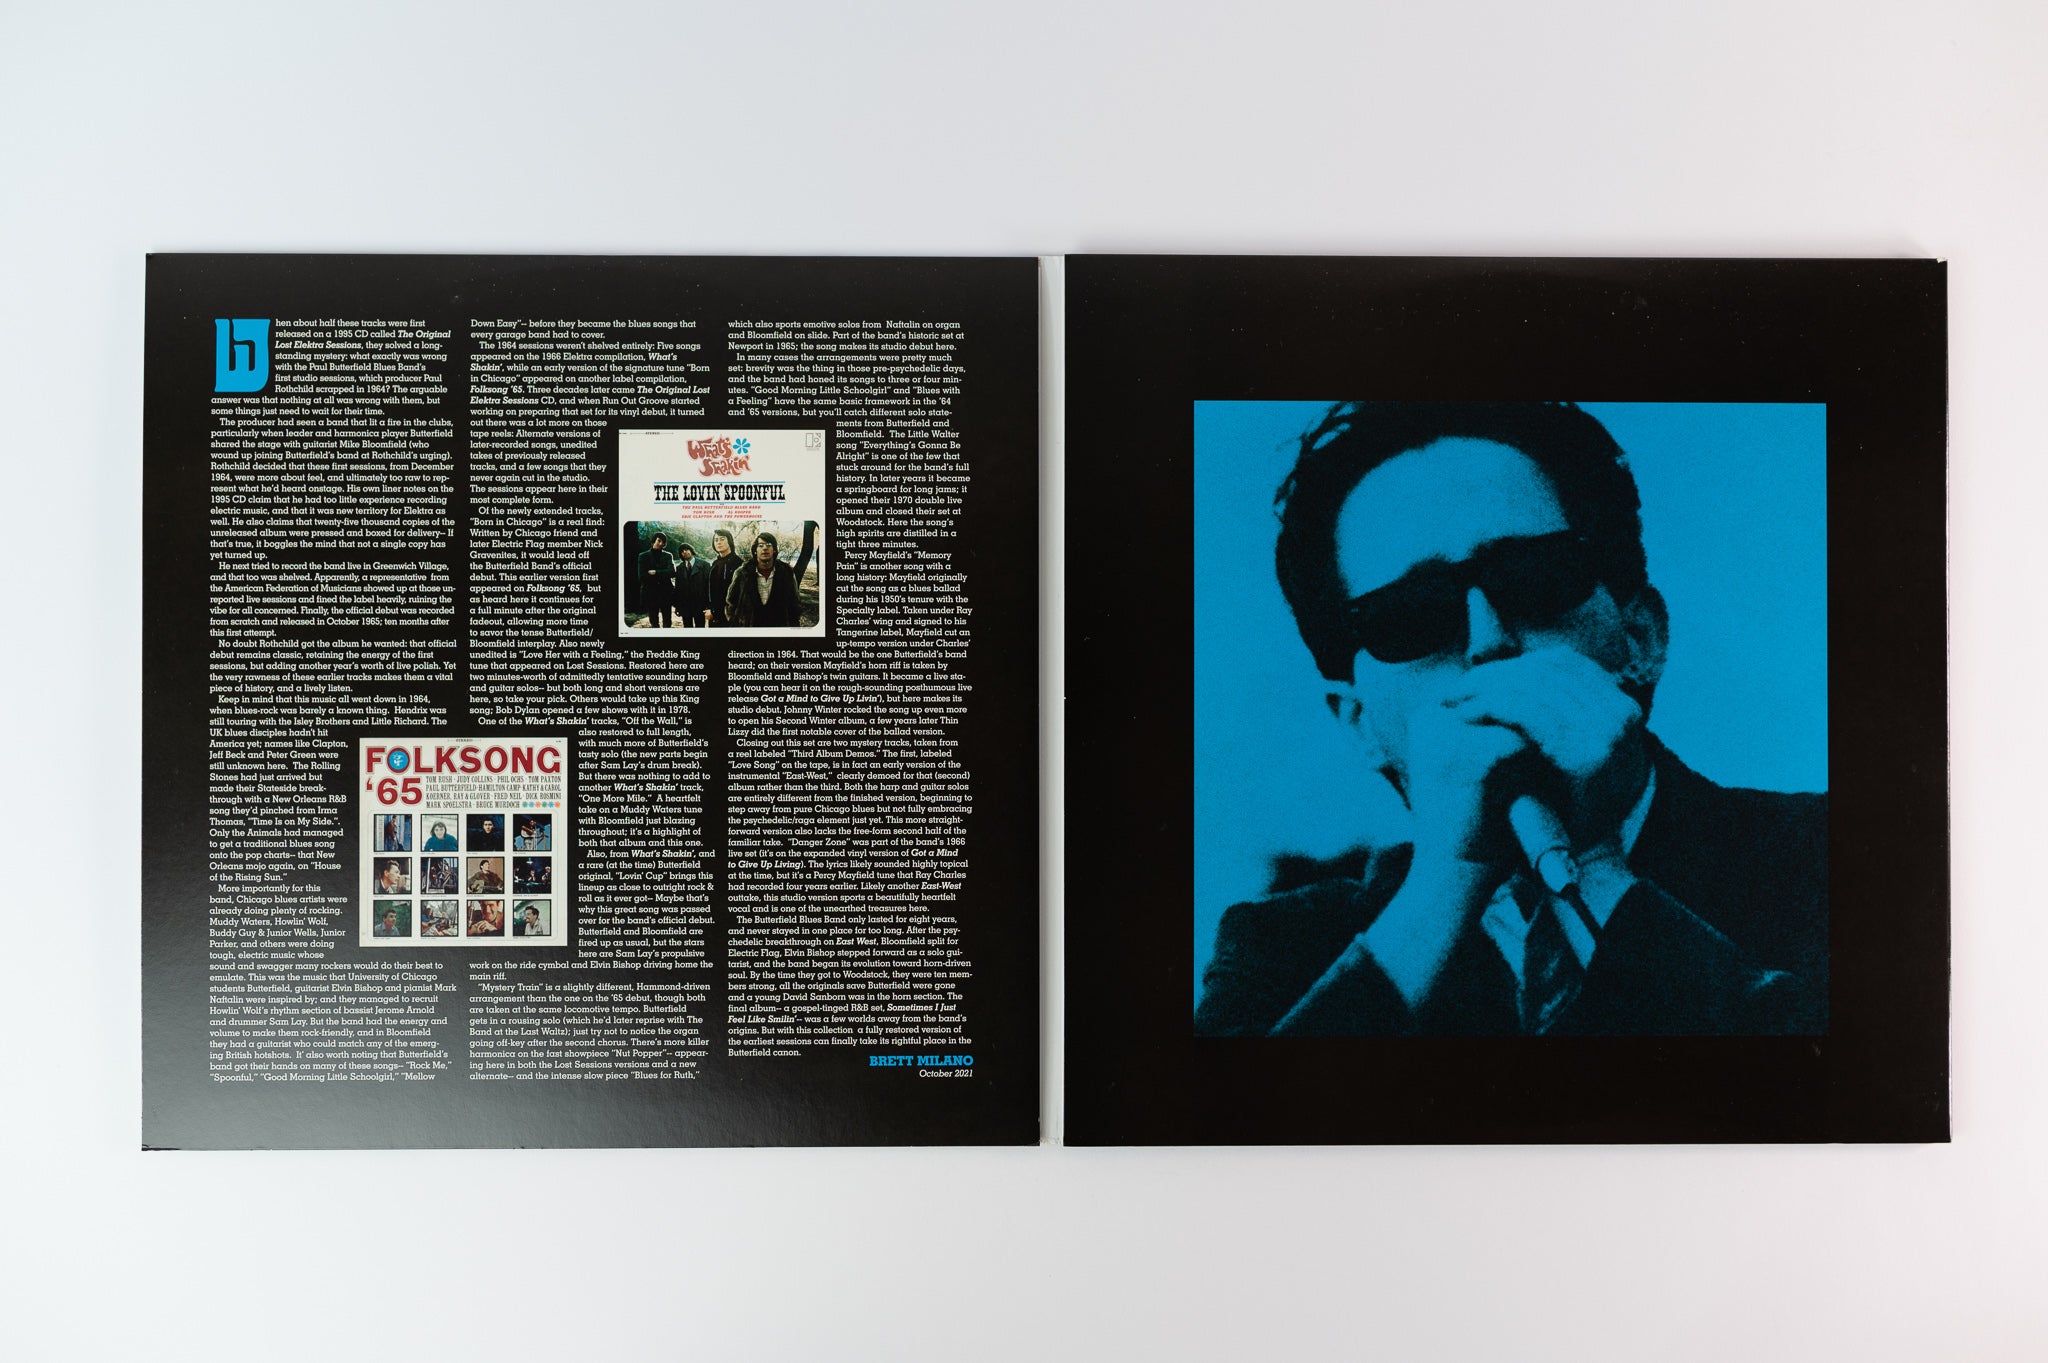 The Paul Butterfield Blues Band - The Original Lost Elektra Sessions Deluxe Edition Reissue